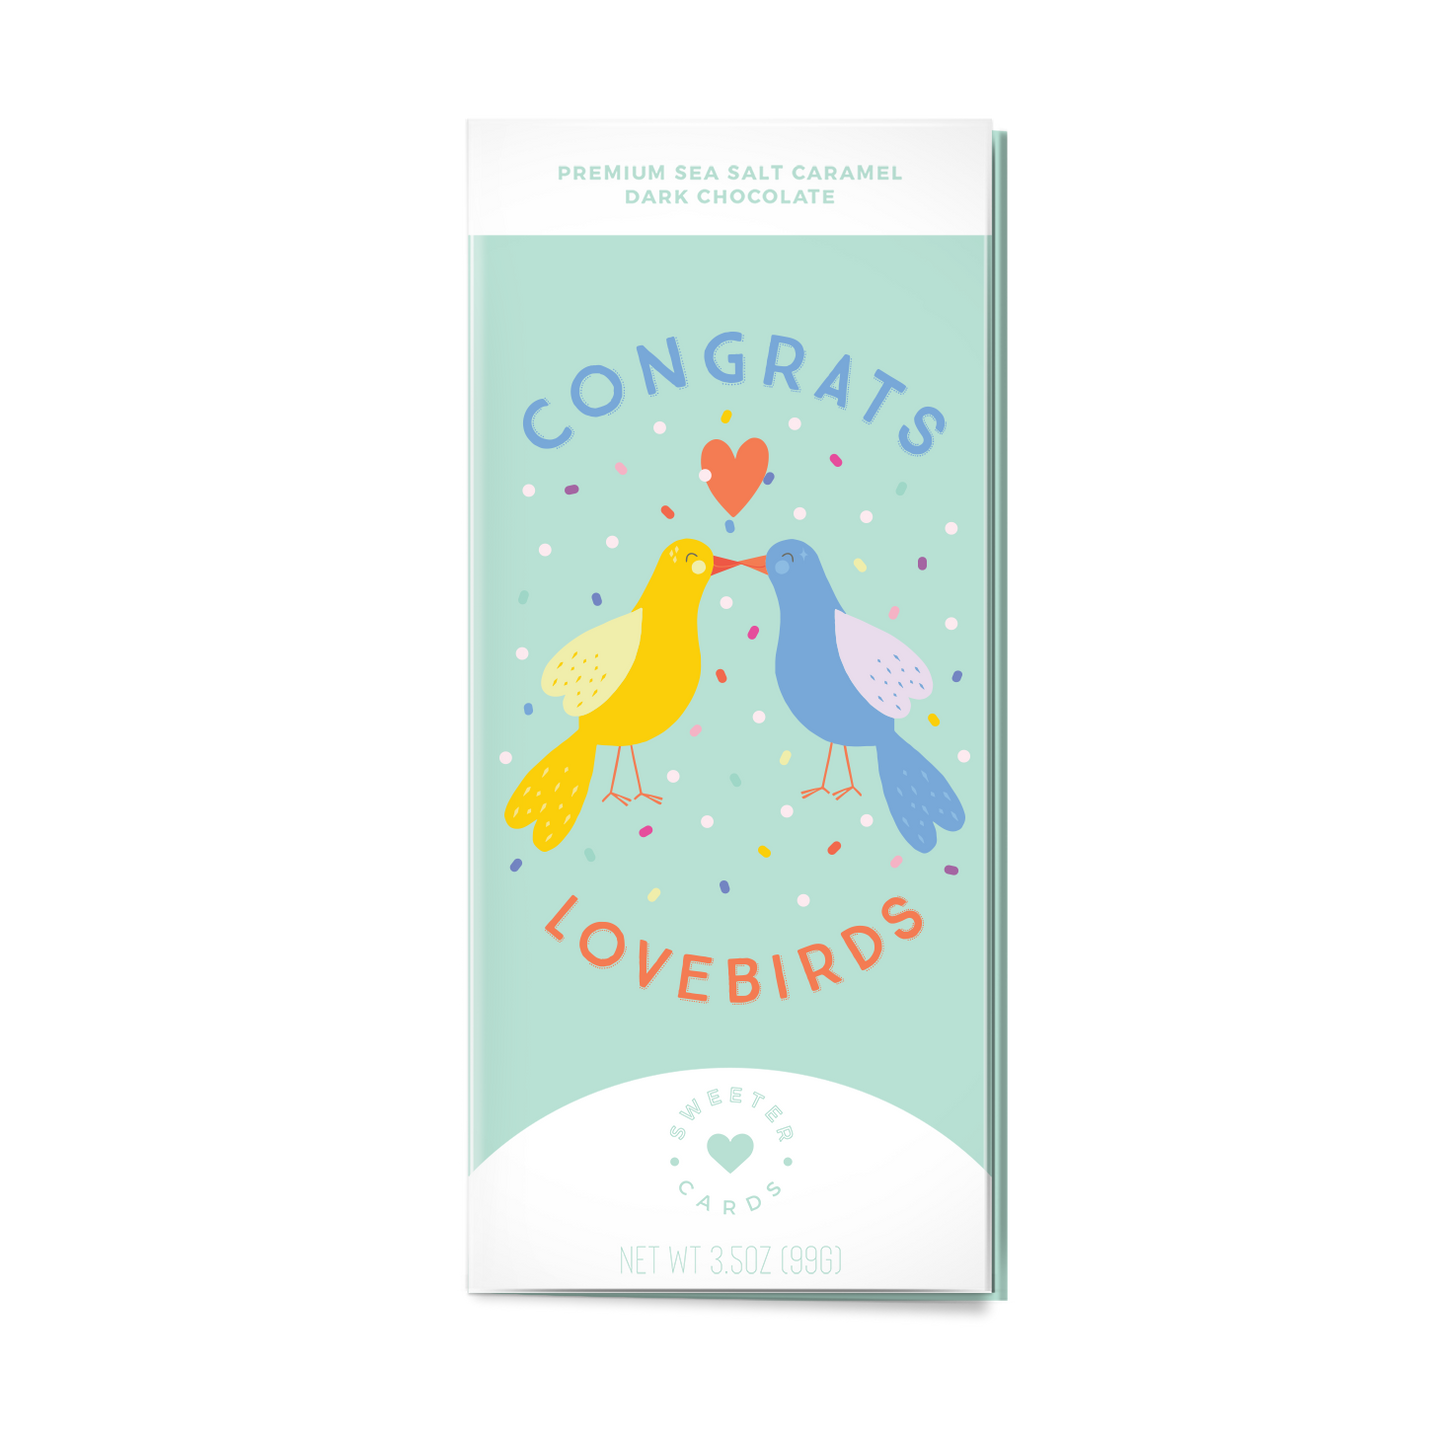 Congrats Love Birds Chocolate Greeting Card Home & Lifestyle